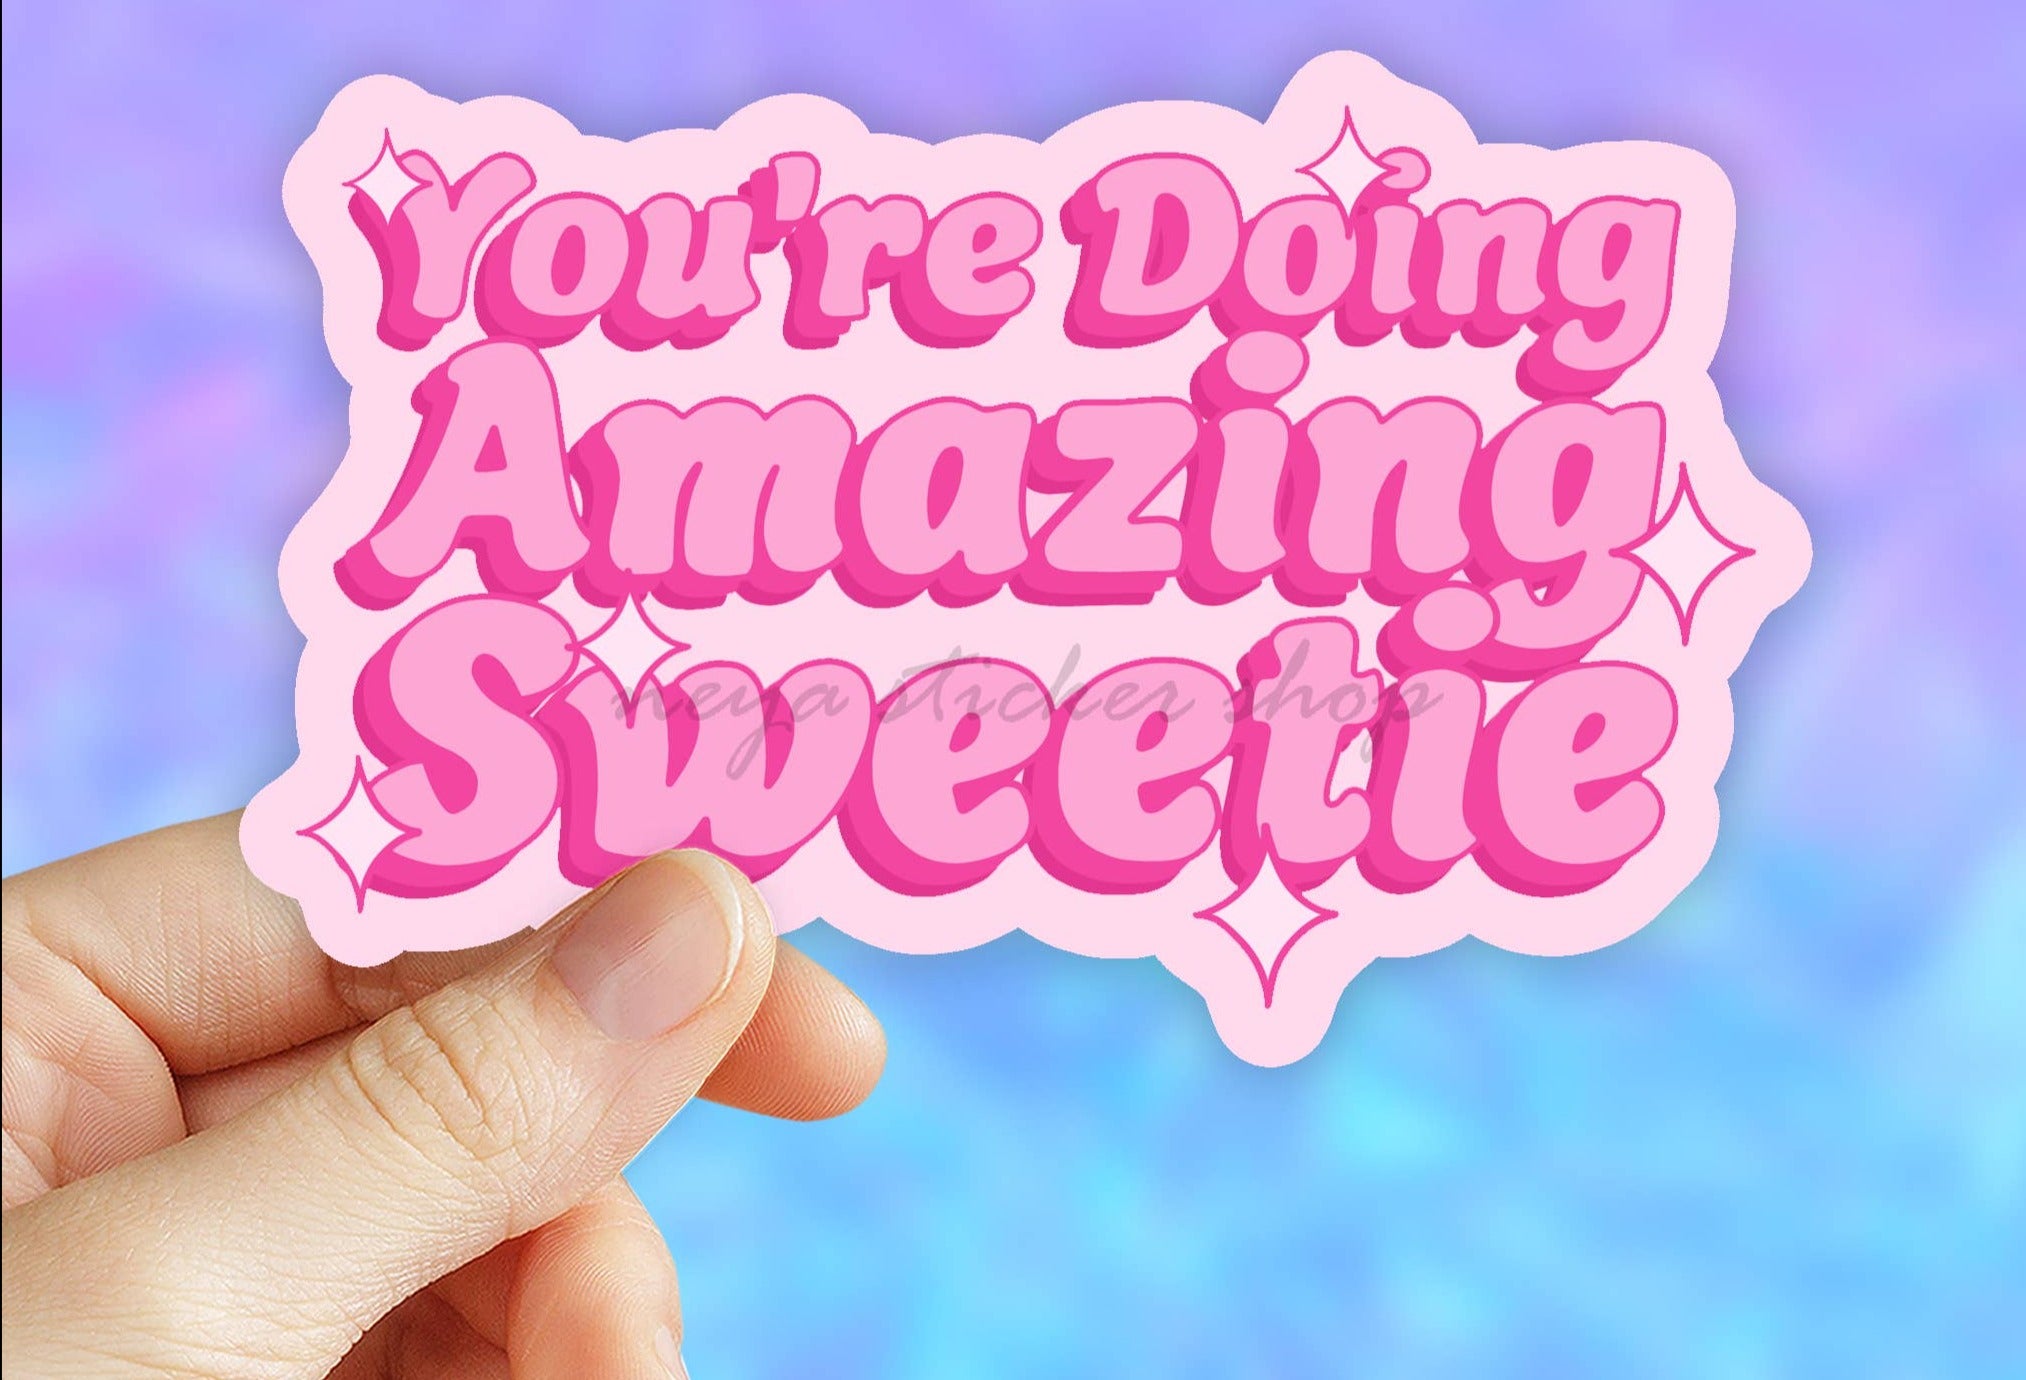 You're Doing Amazing Sweetie sticker, motivational quotes: 3" (Standard)